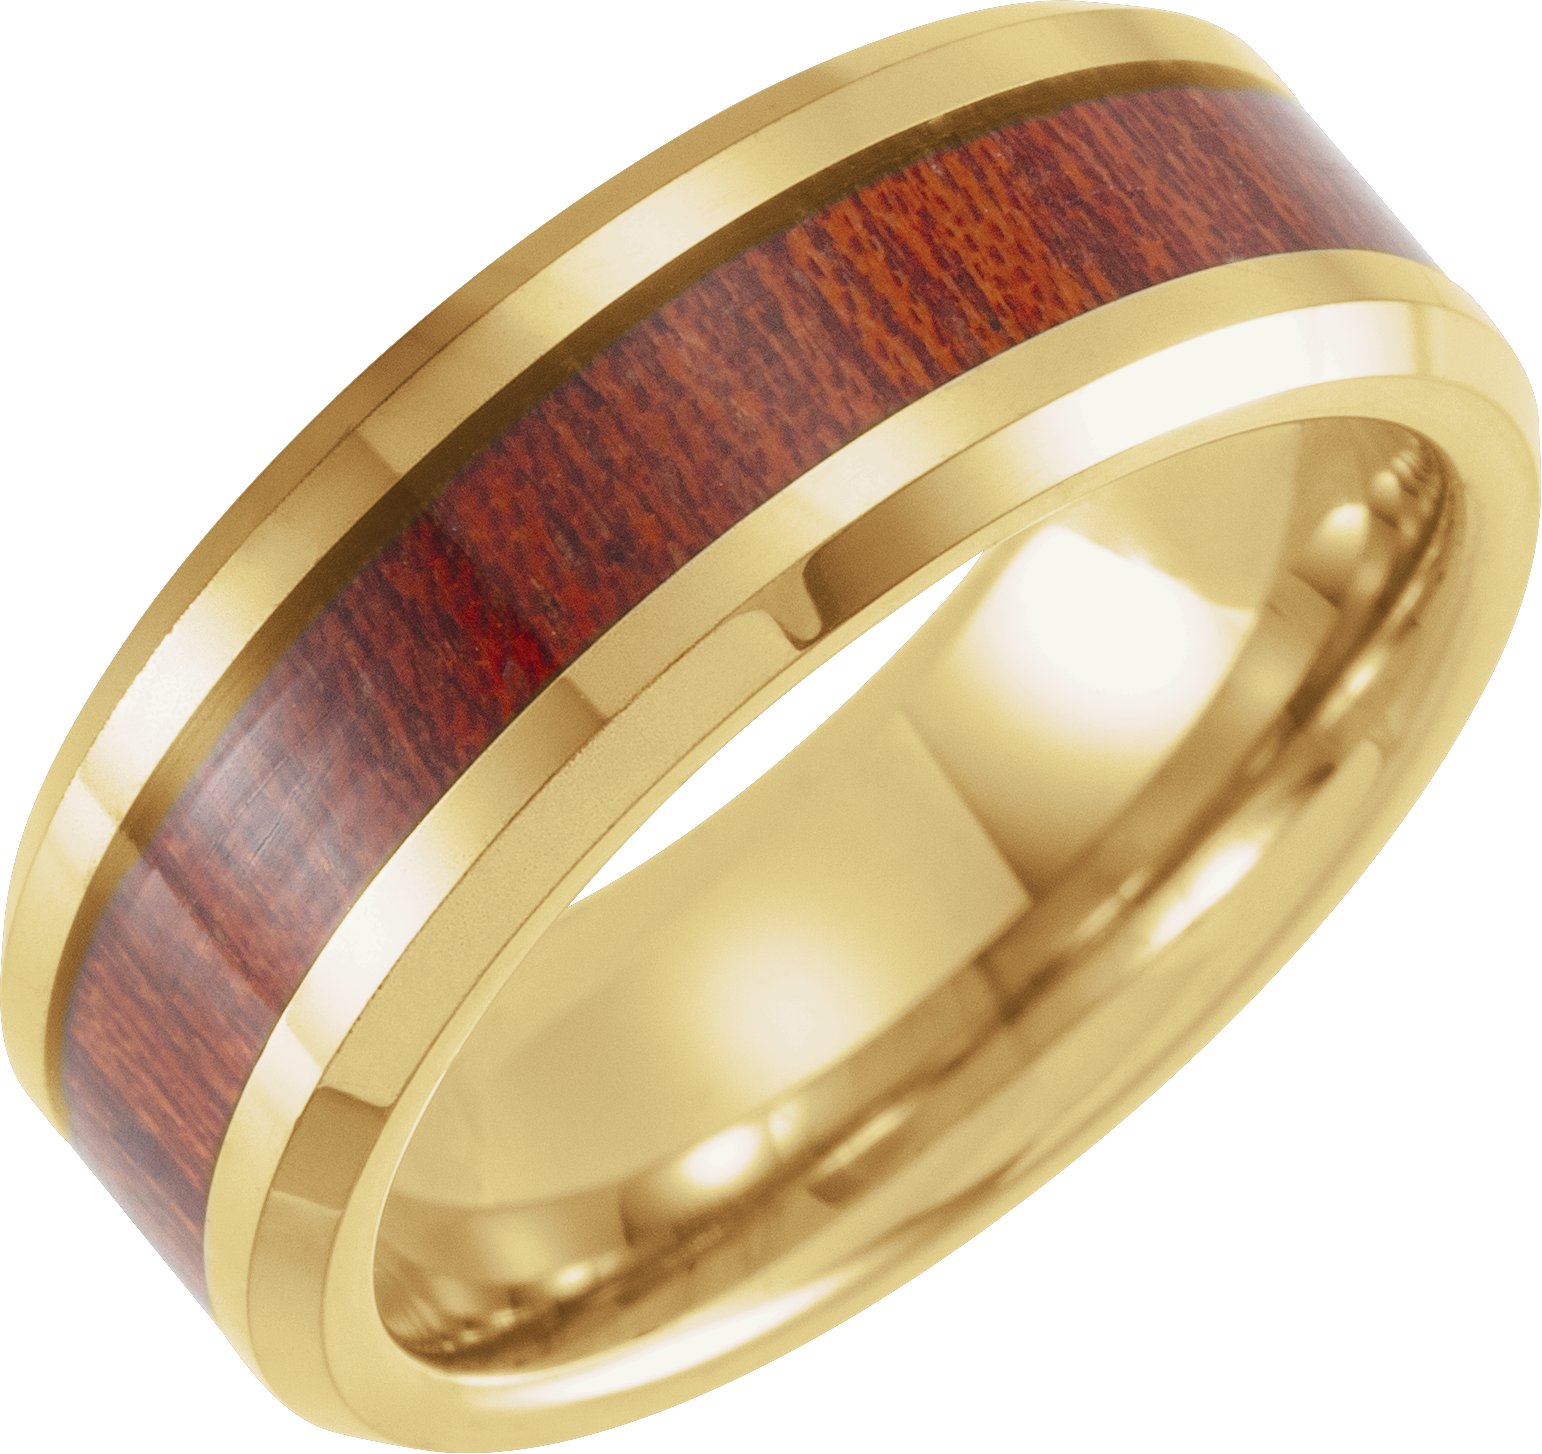 18K Yellow Gold PVD Tungsten 8 mm Beveled Band with Walnut Wood Inlay Size 13